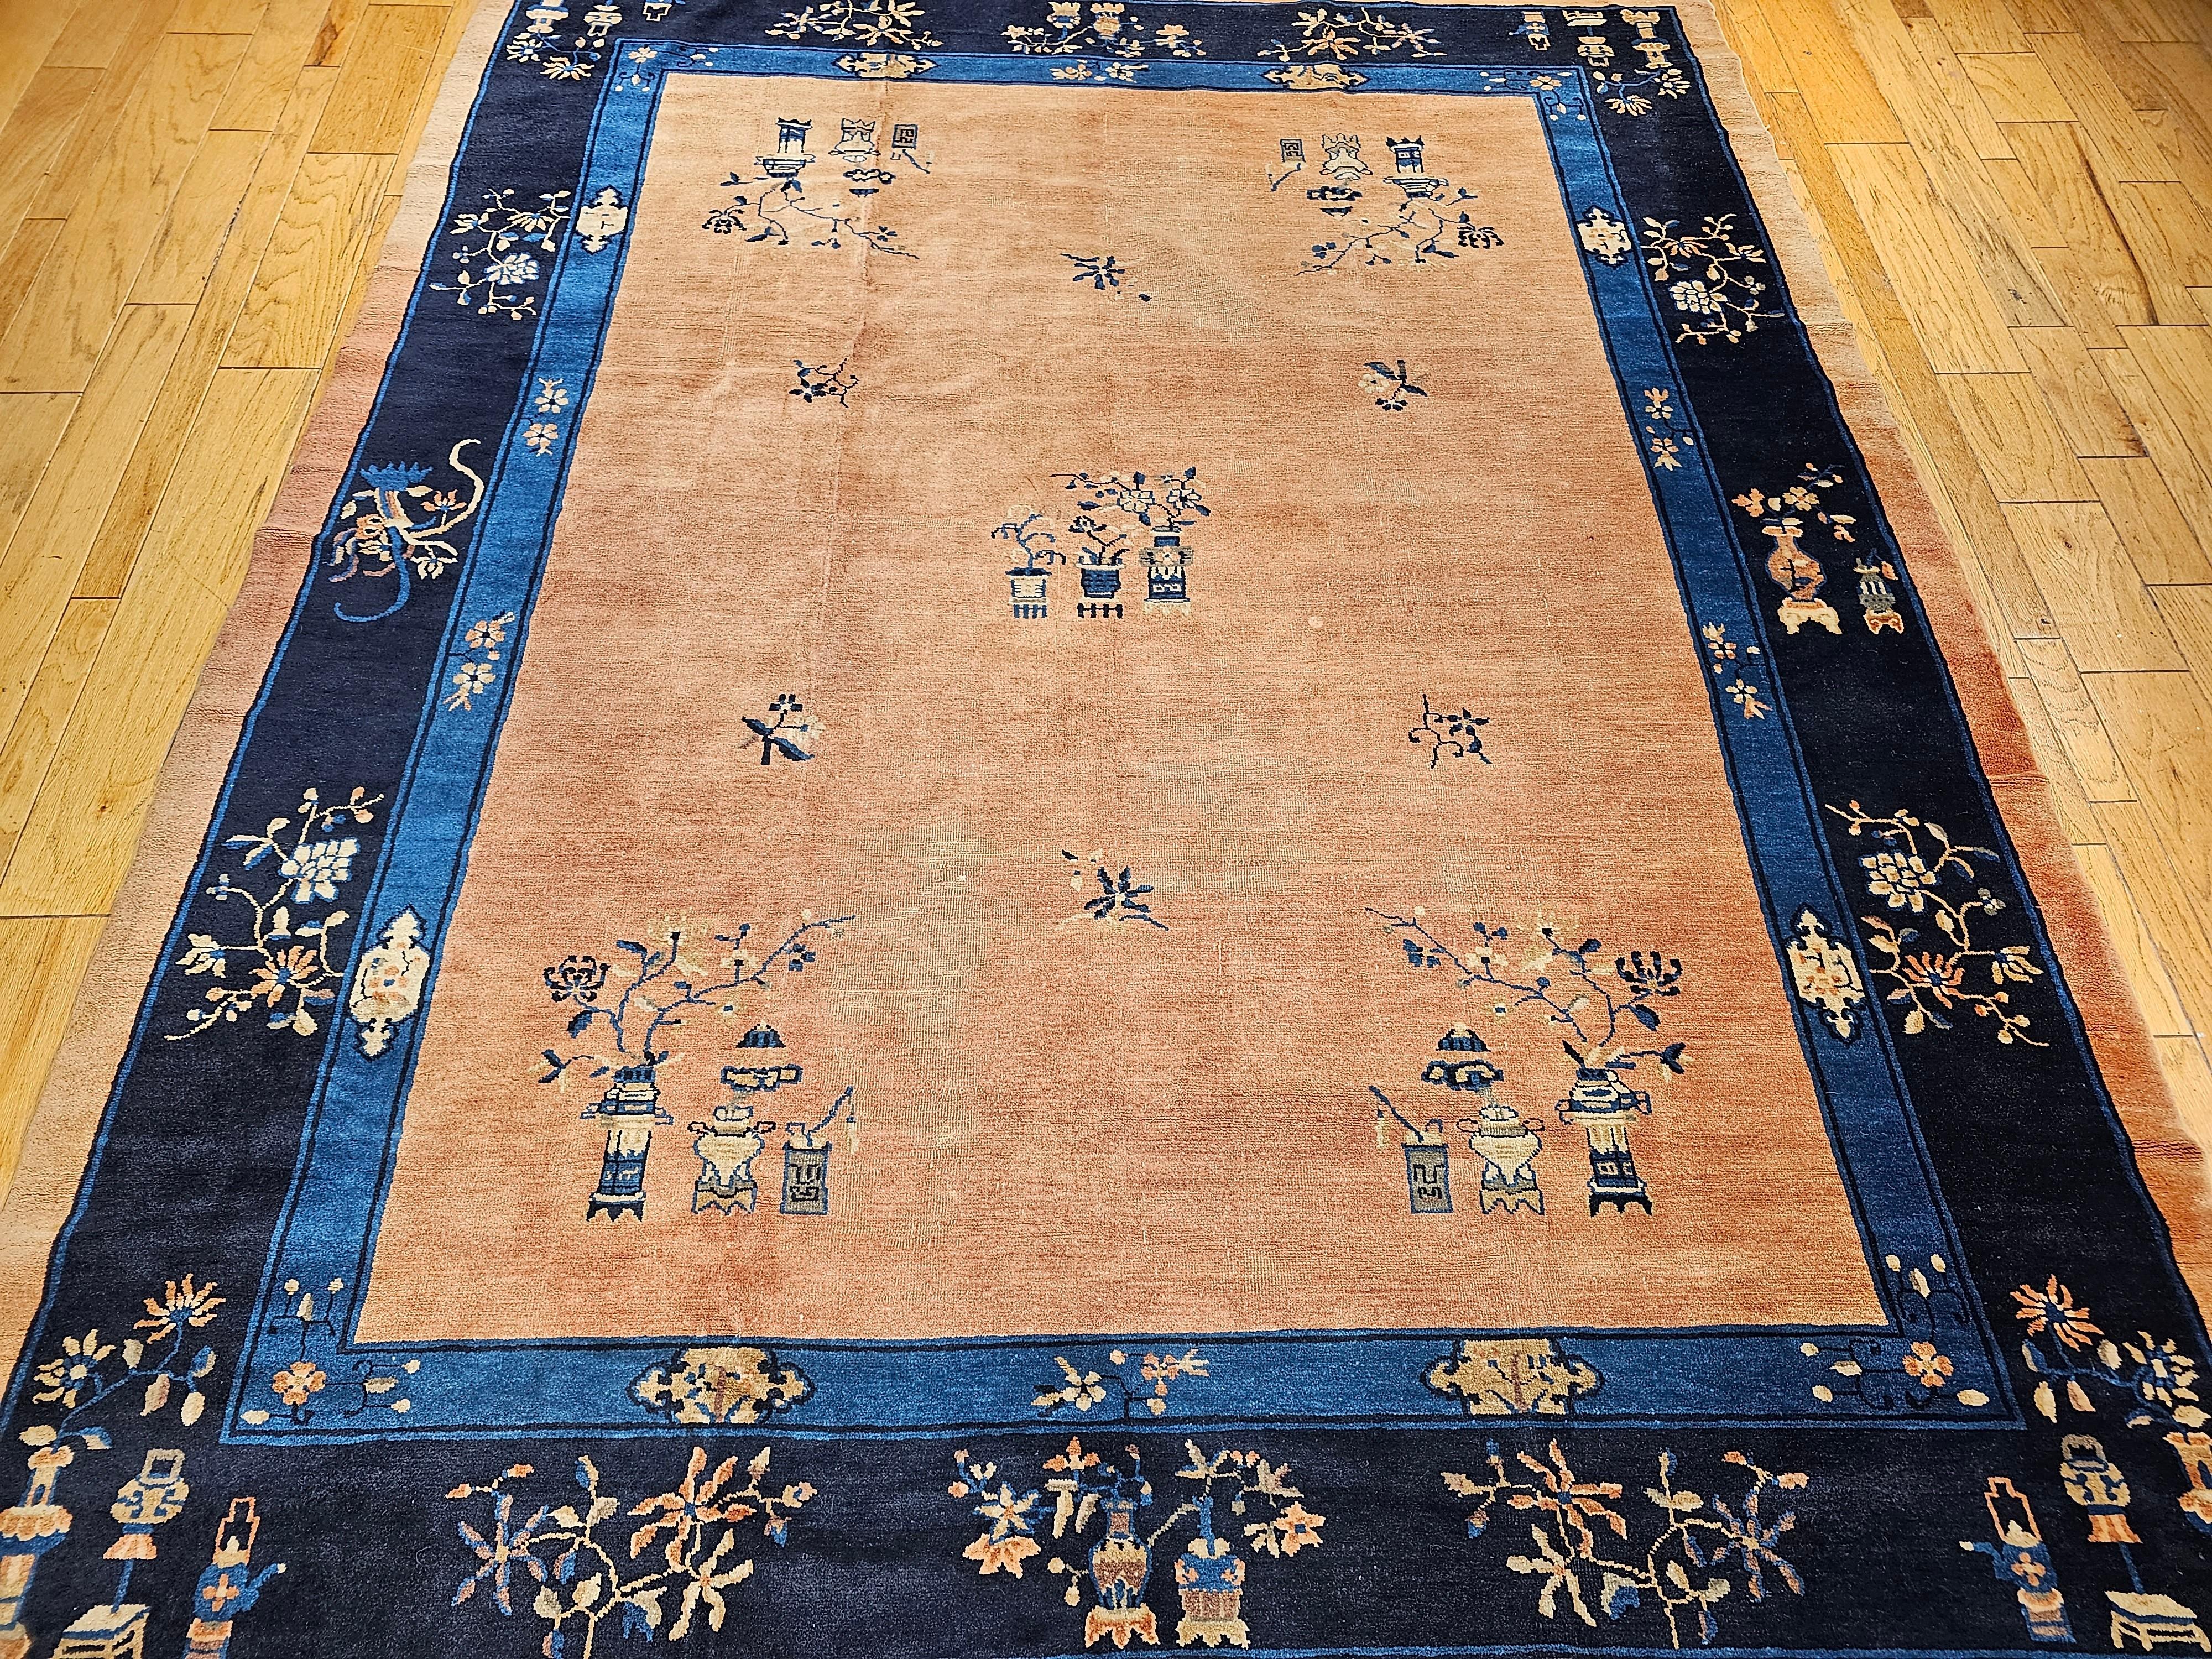 Vintage  hand-knotted Chinese Peking room size rug from the late 1800s.  The rug has a pale peach field color with navy blue and pale blue border colors.  The rug has a beautiful subtle all-over classic Chinese floral pattern.  The Chinese Peking